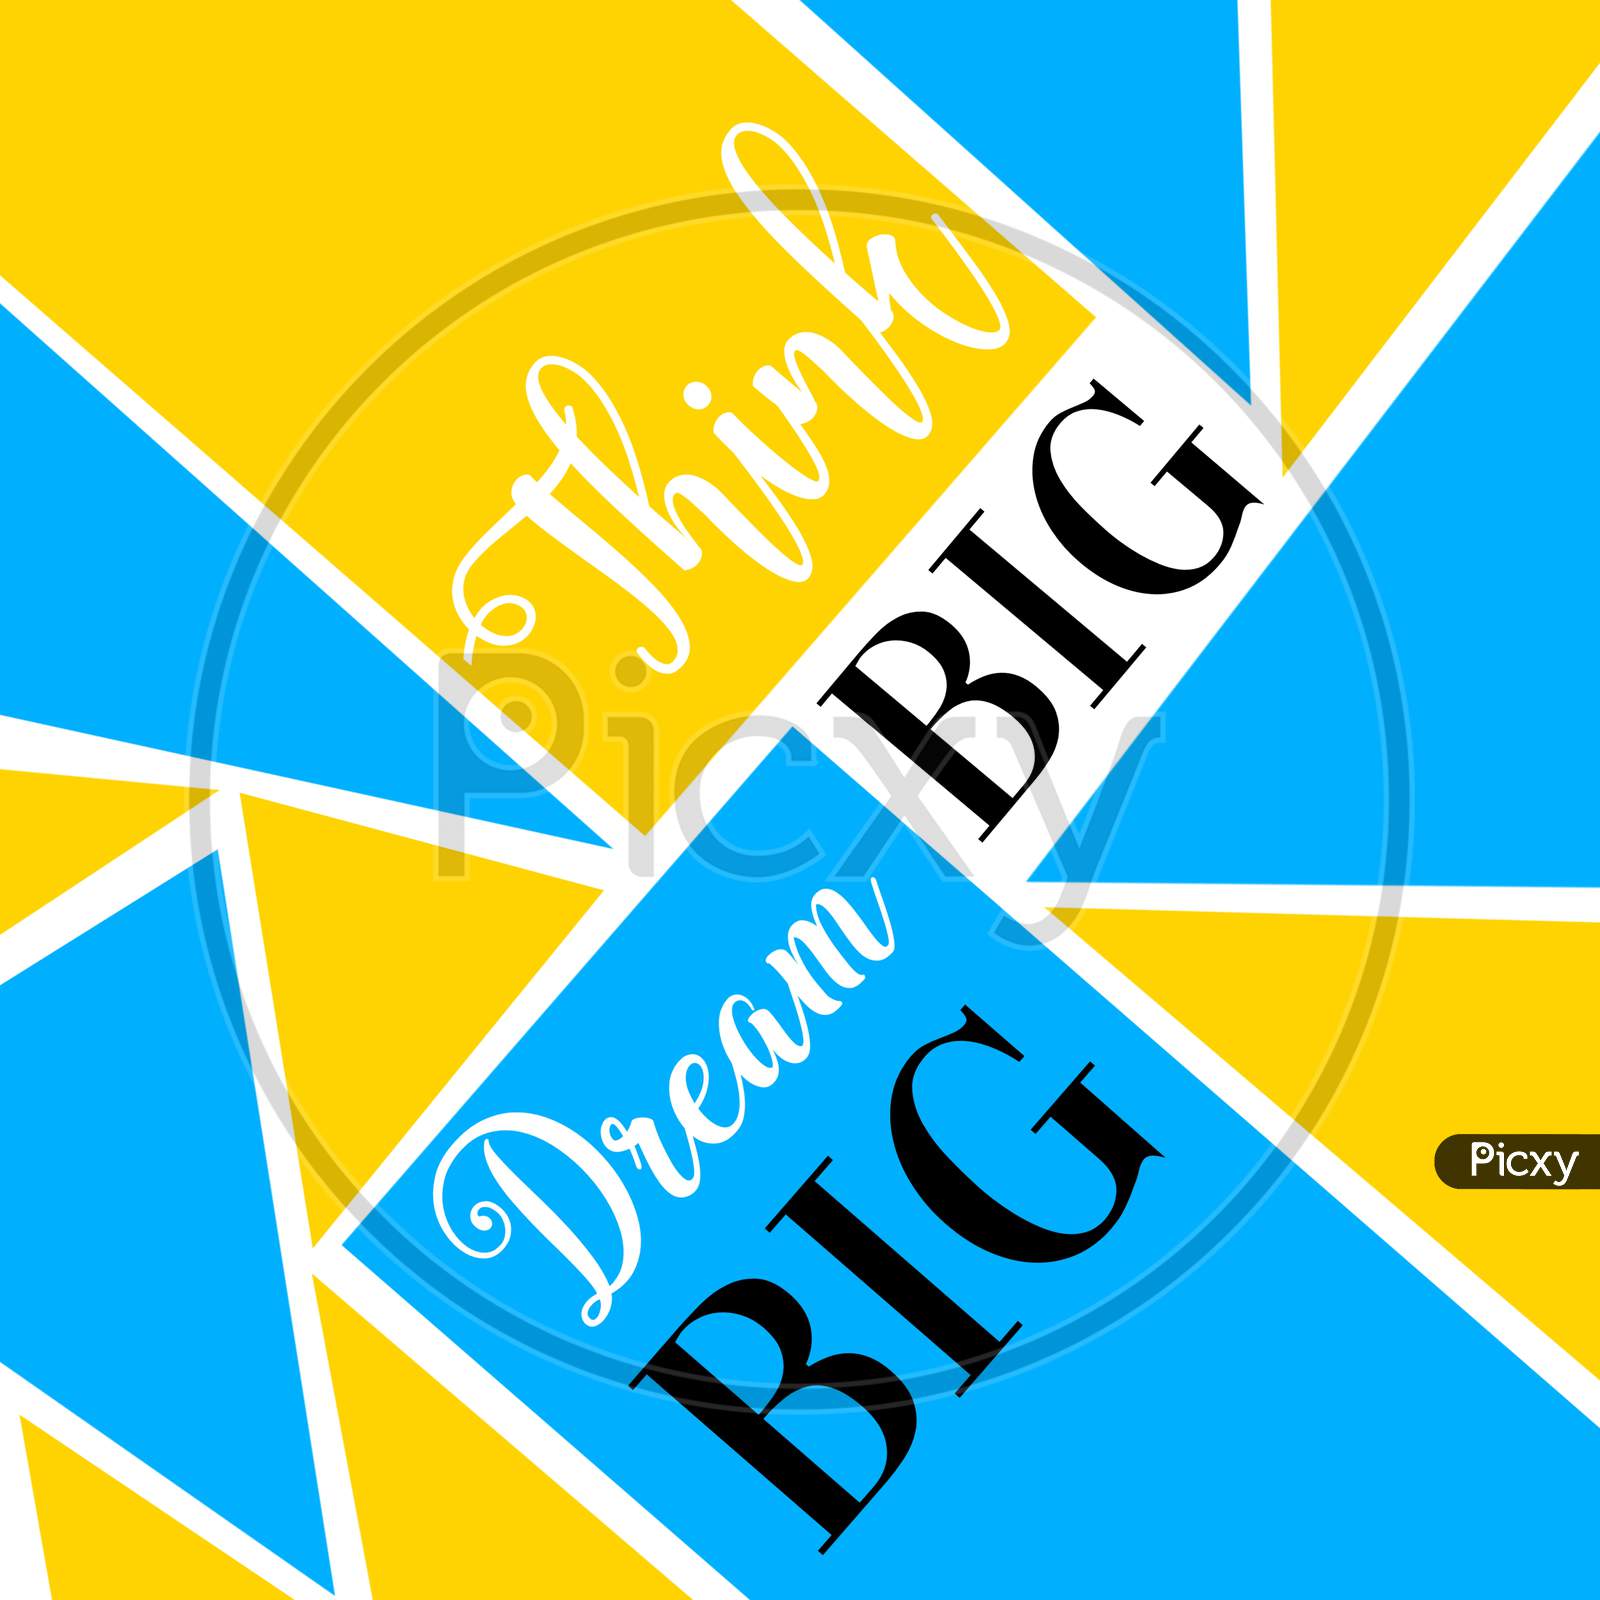 Think Big Dream Big (colorful background with black and white color fonts)